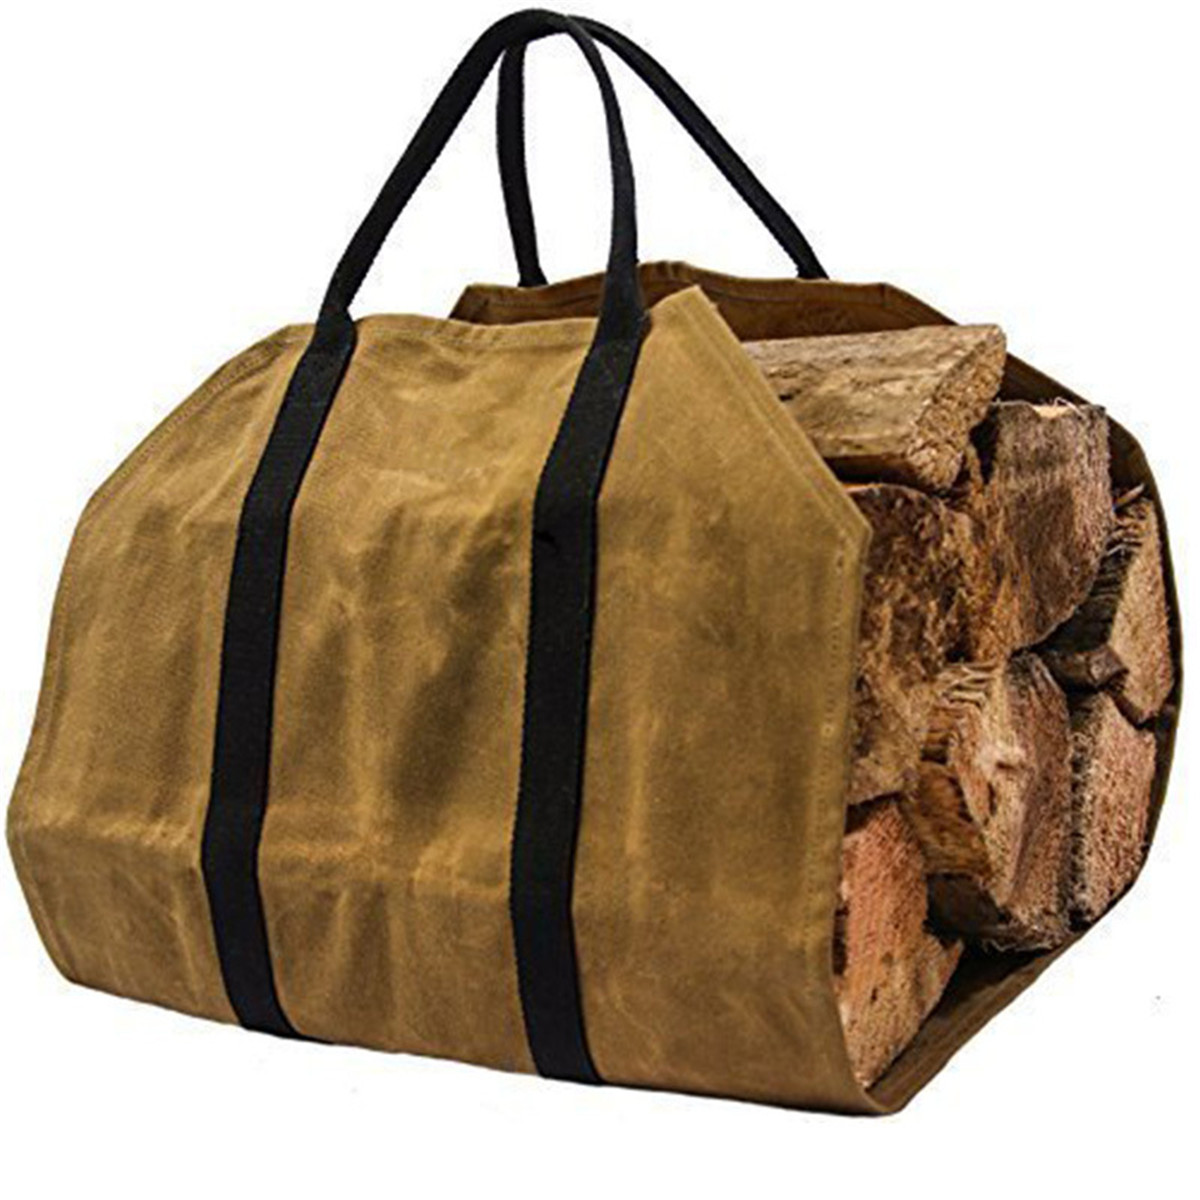 khaki-Firewood-Carrier-Log-Carrier-Wood-Carrying-Tool-Bag-for-Fireplace-Waxed-Canvas-1388831-5